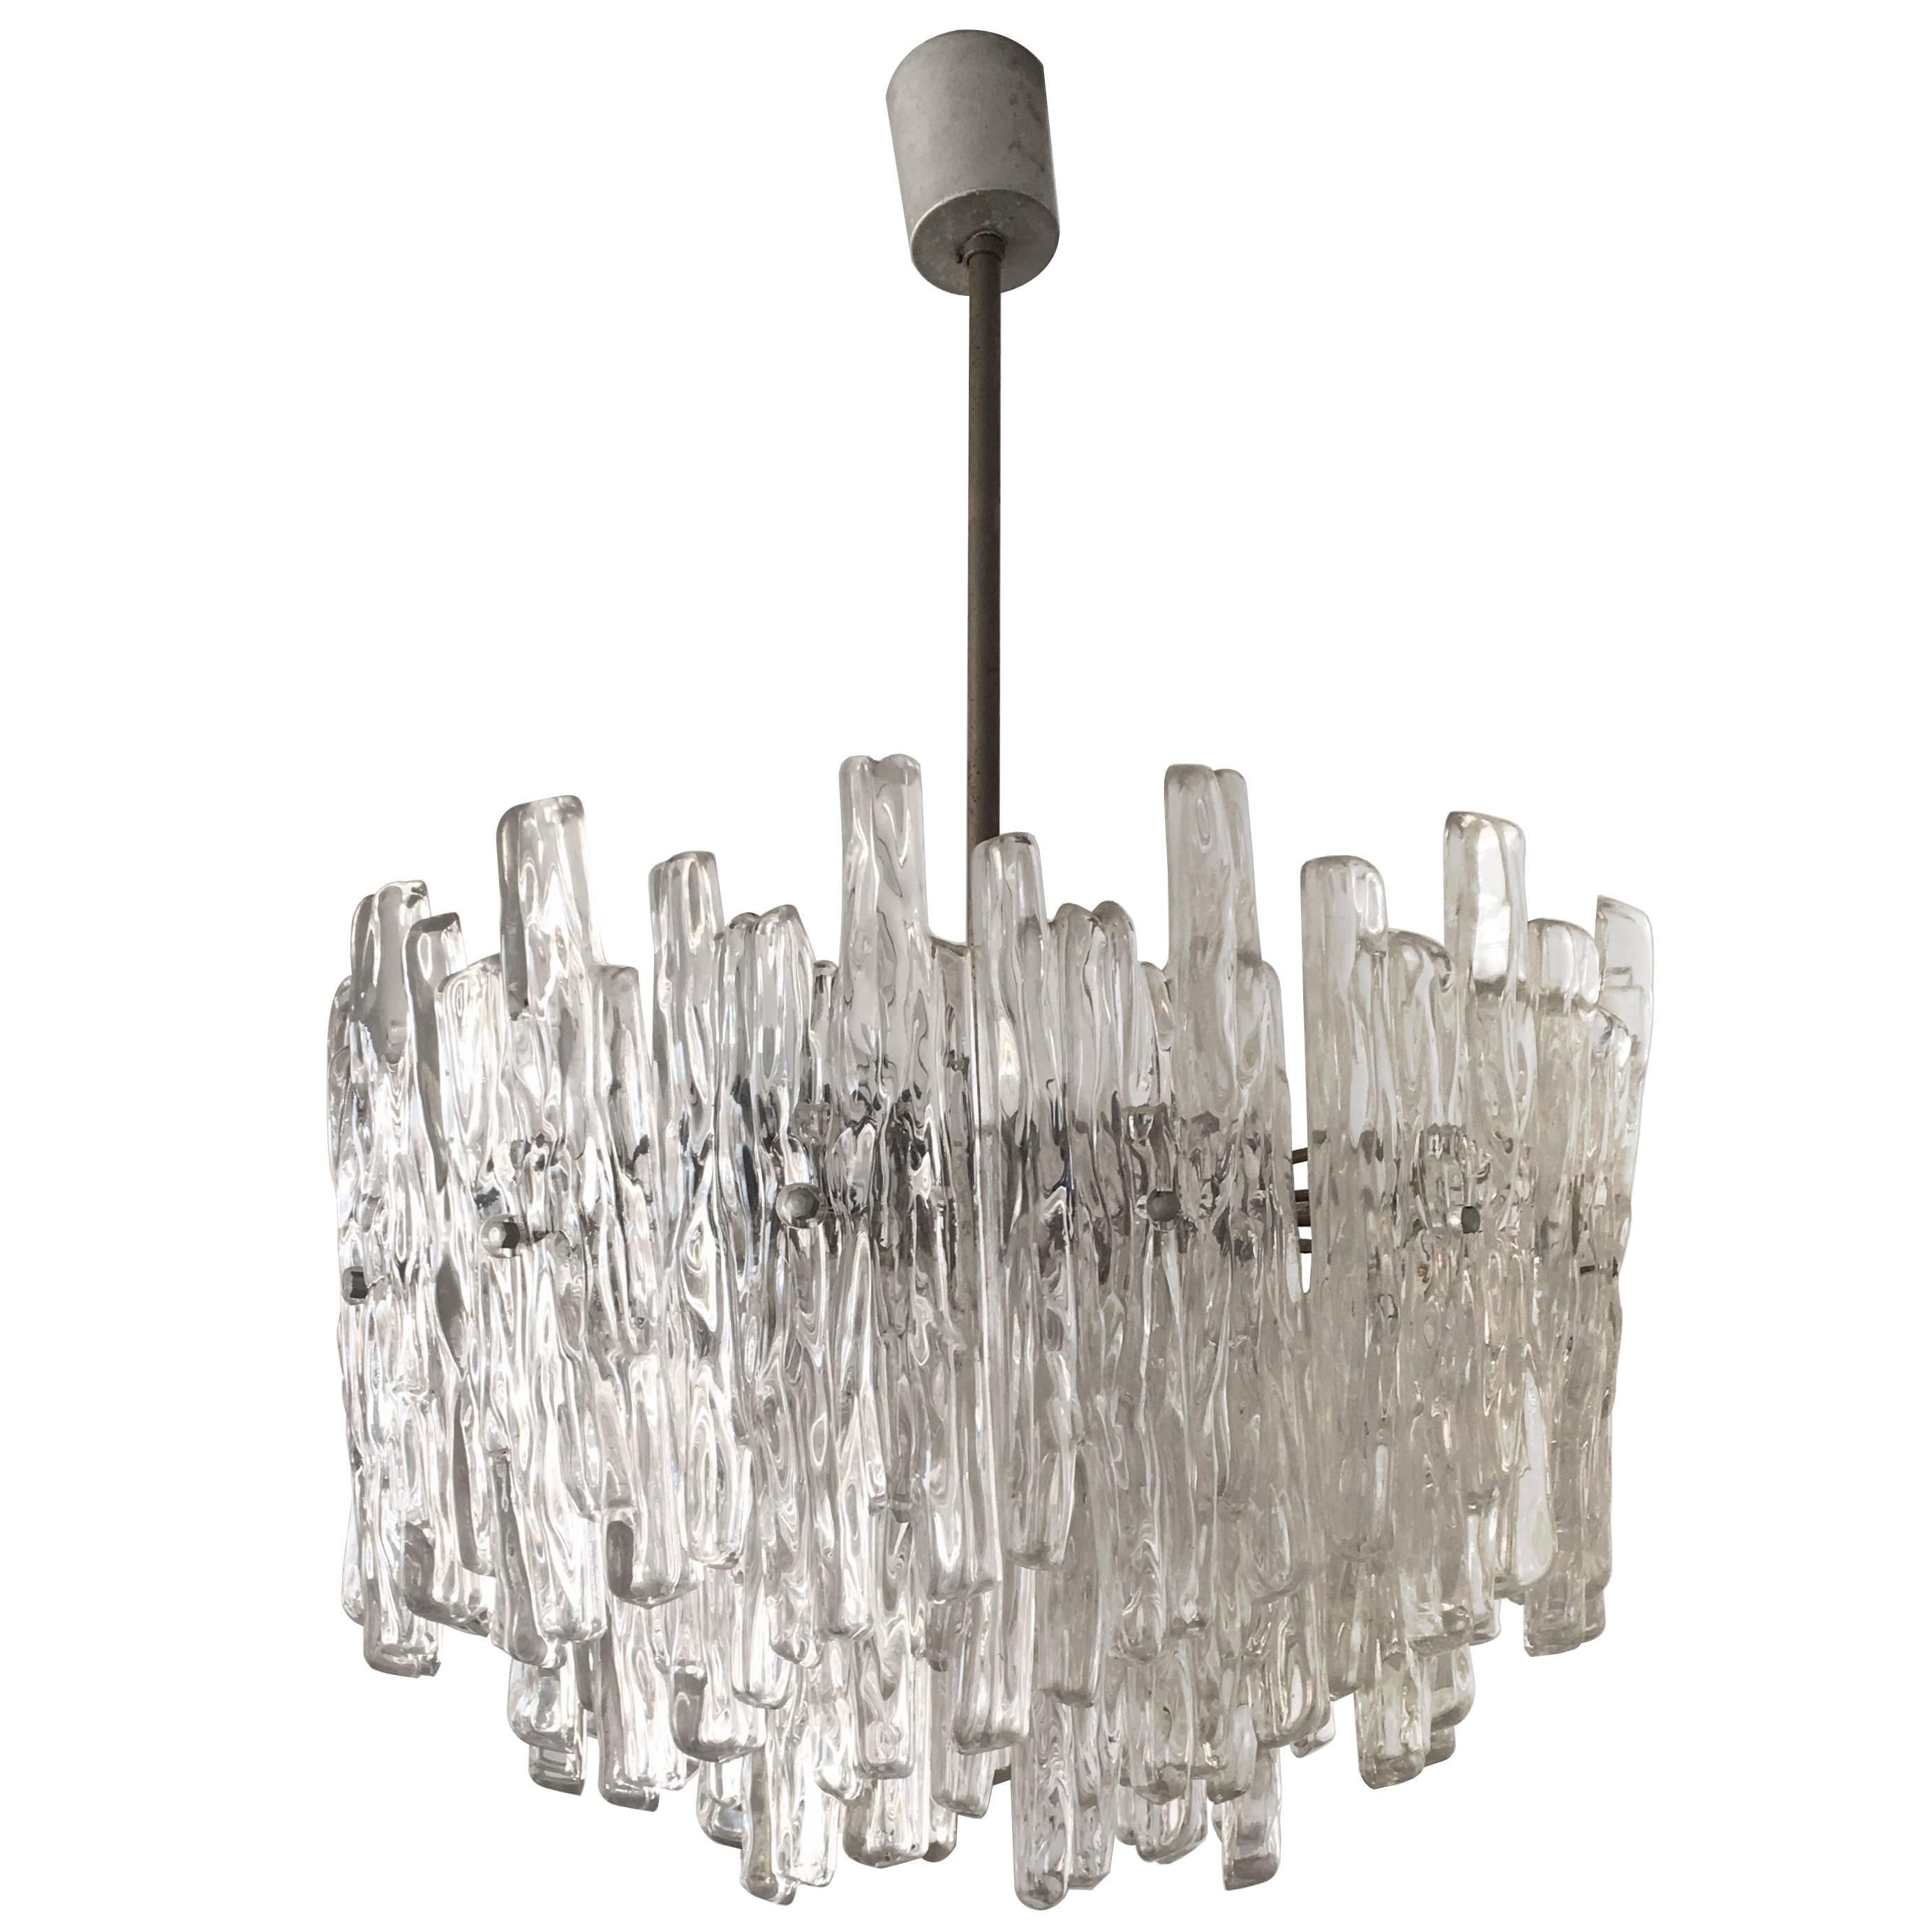 Exceptional Three-Tiered Dramatic Lucite Chandelier in Style of Kalmar, 1960s For Sale